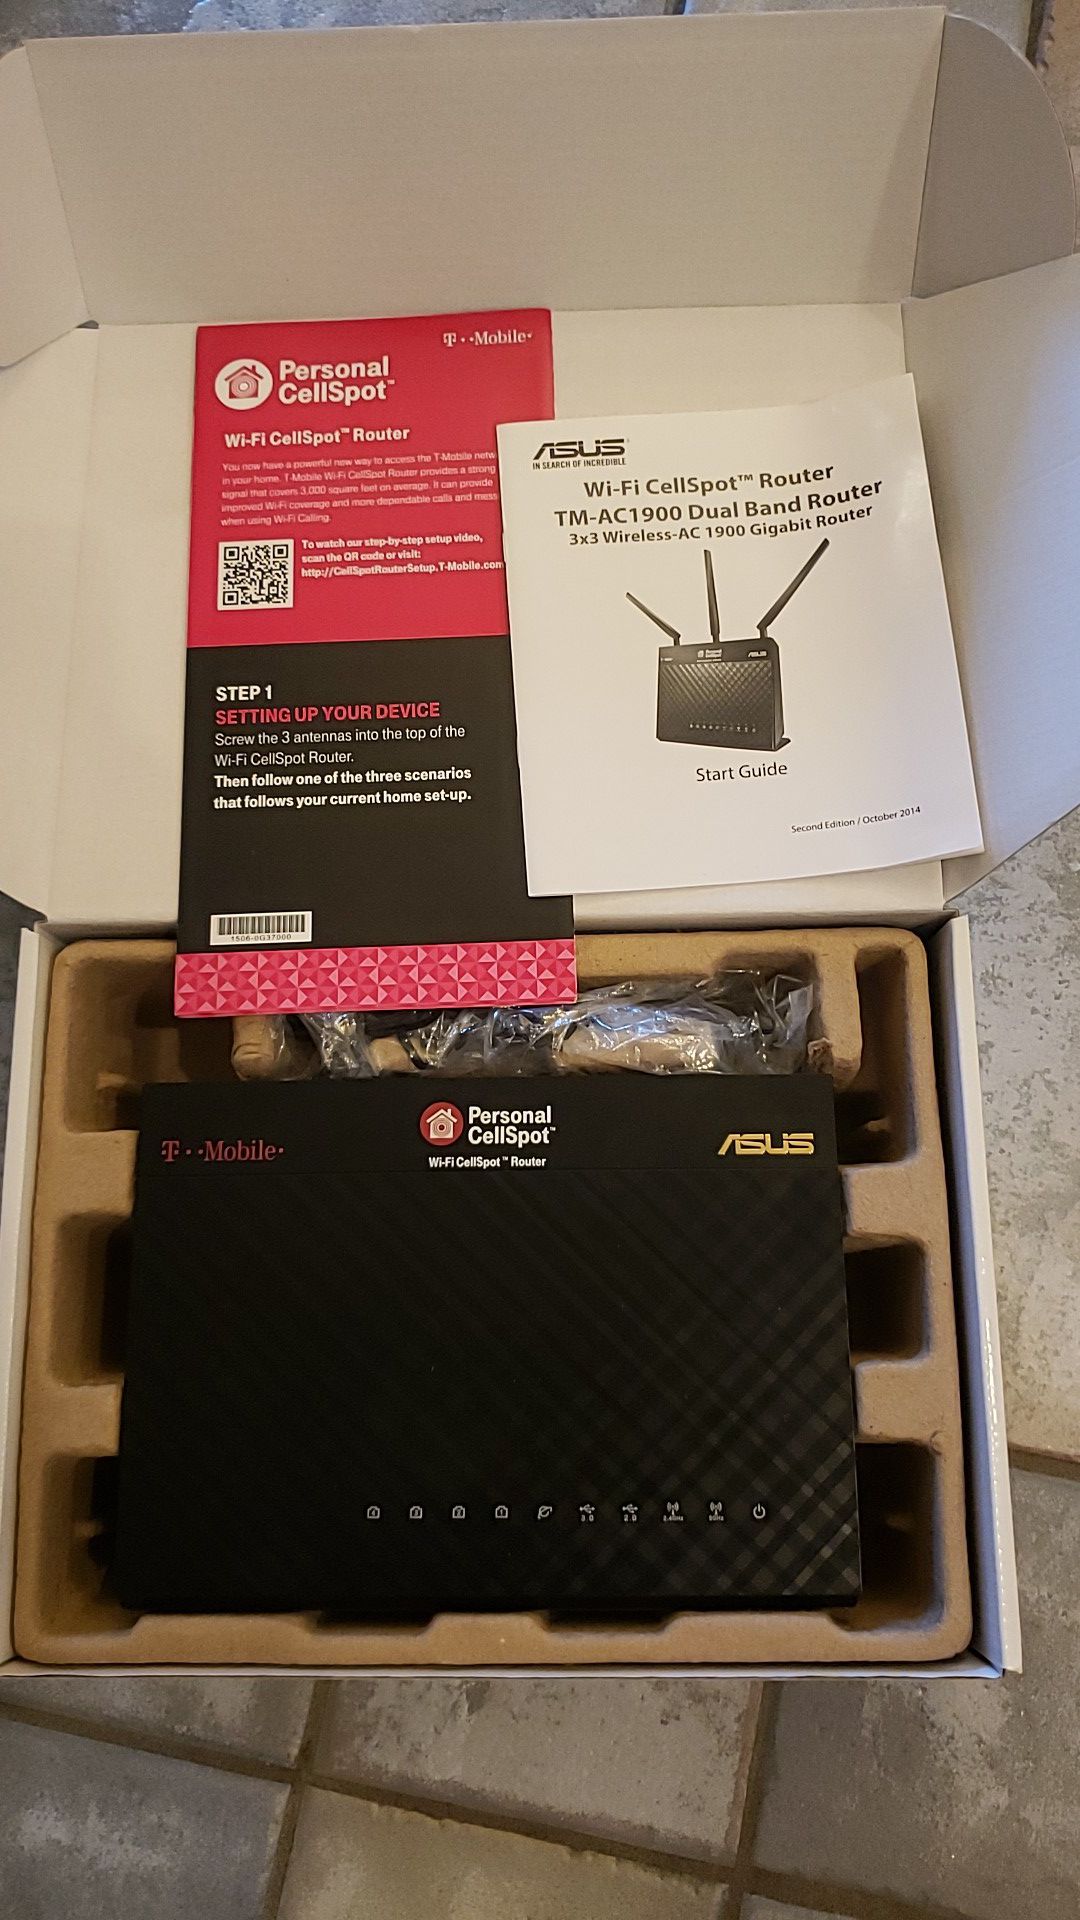 Asus tm-ac1900 Dual band router